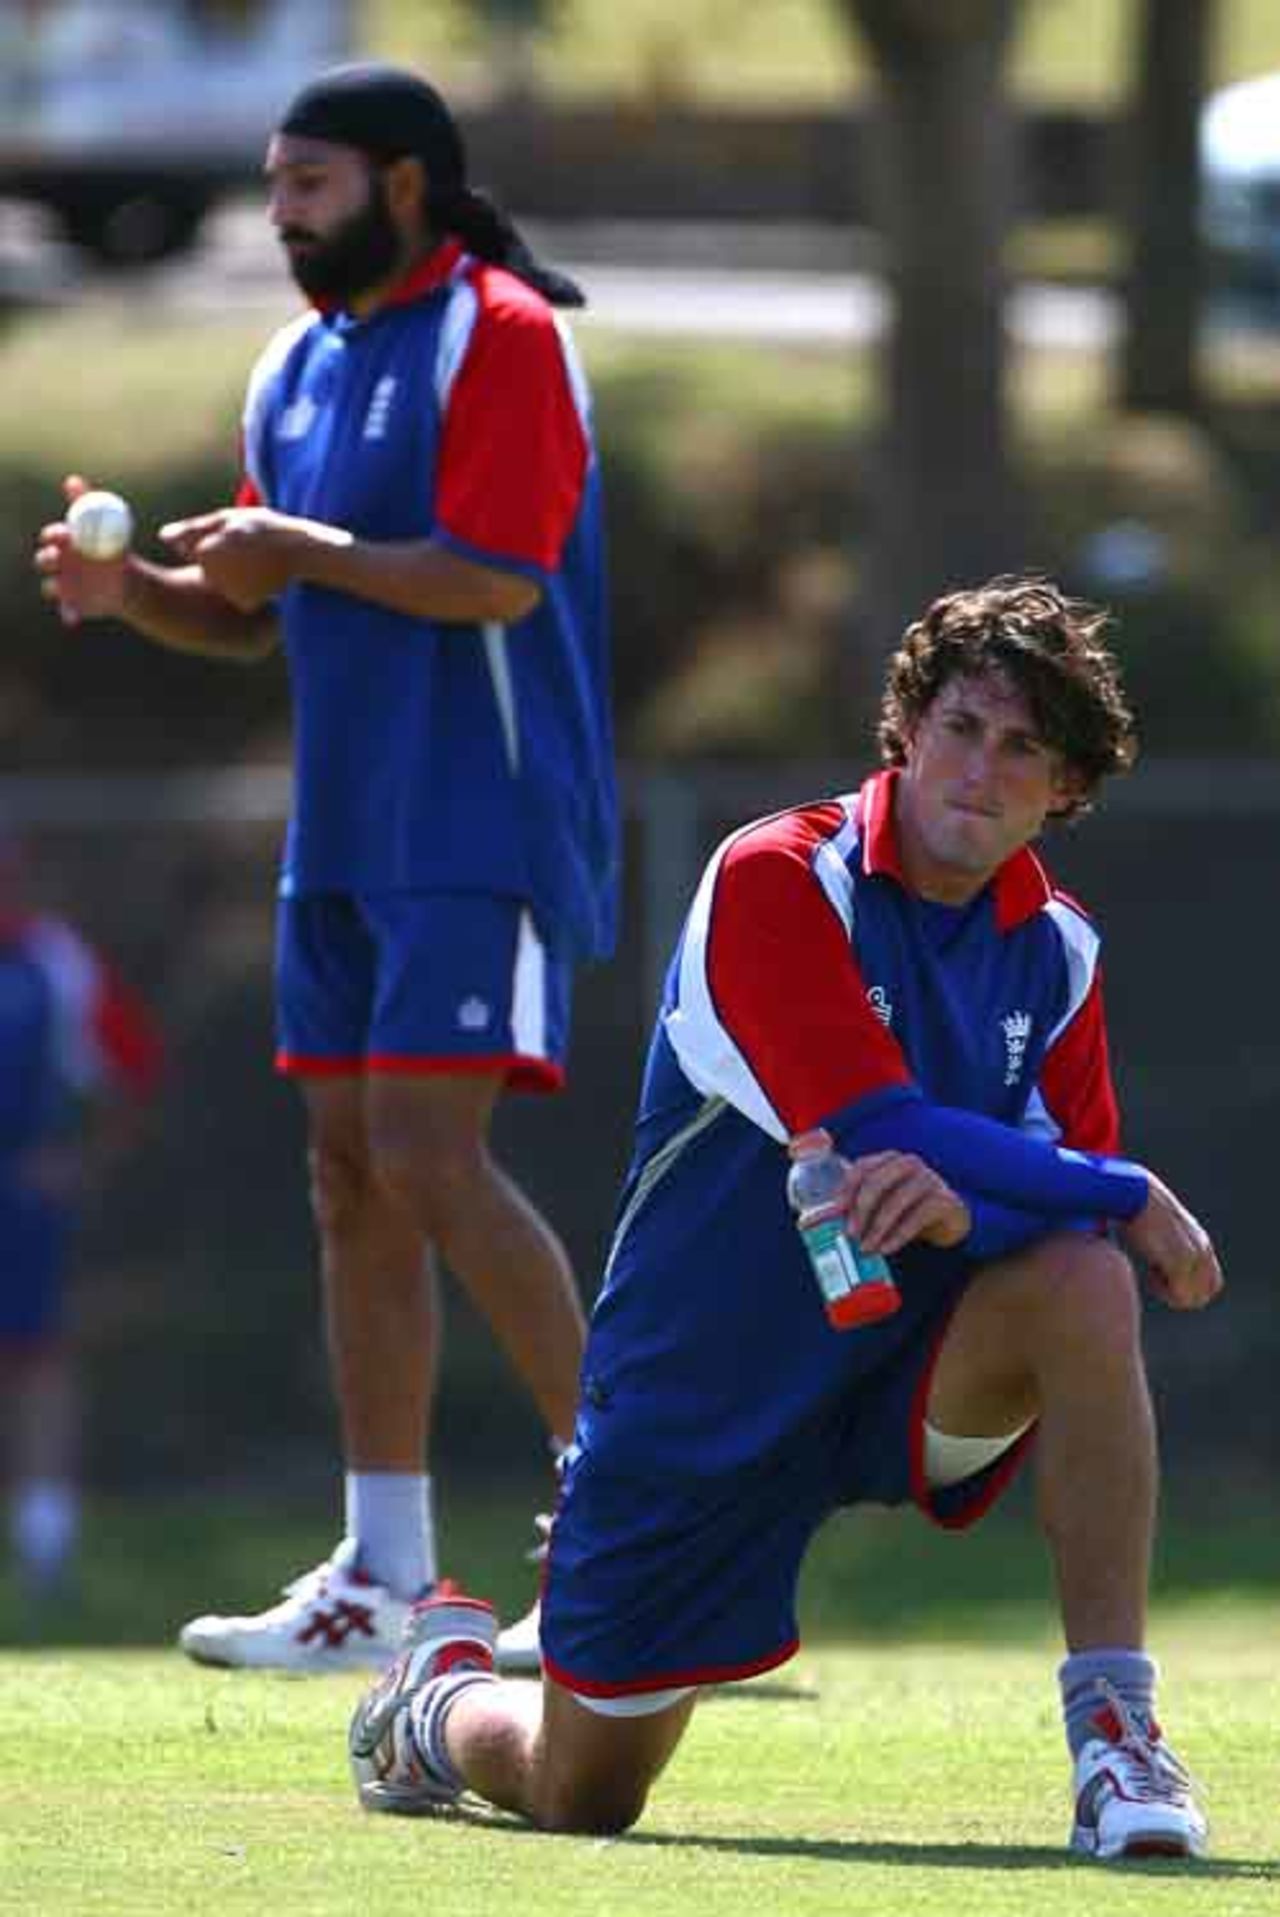 Jon Lewis and Monty Panesar warm-up during England's practice session, Gros Islet, March 14, 2007